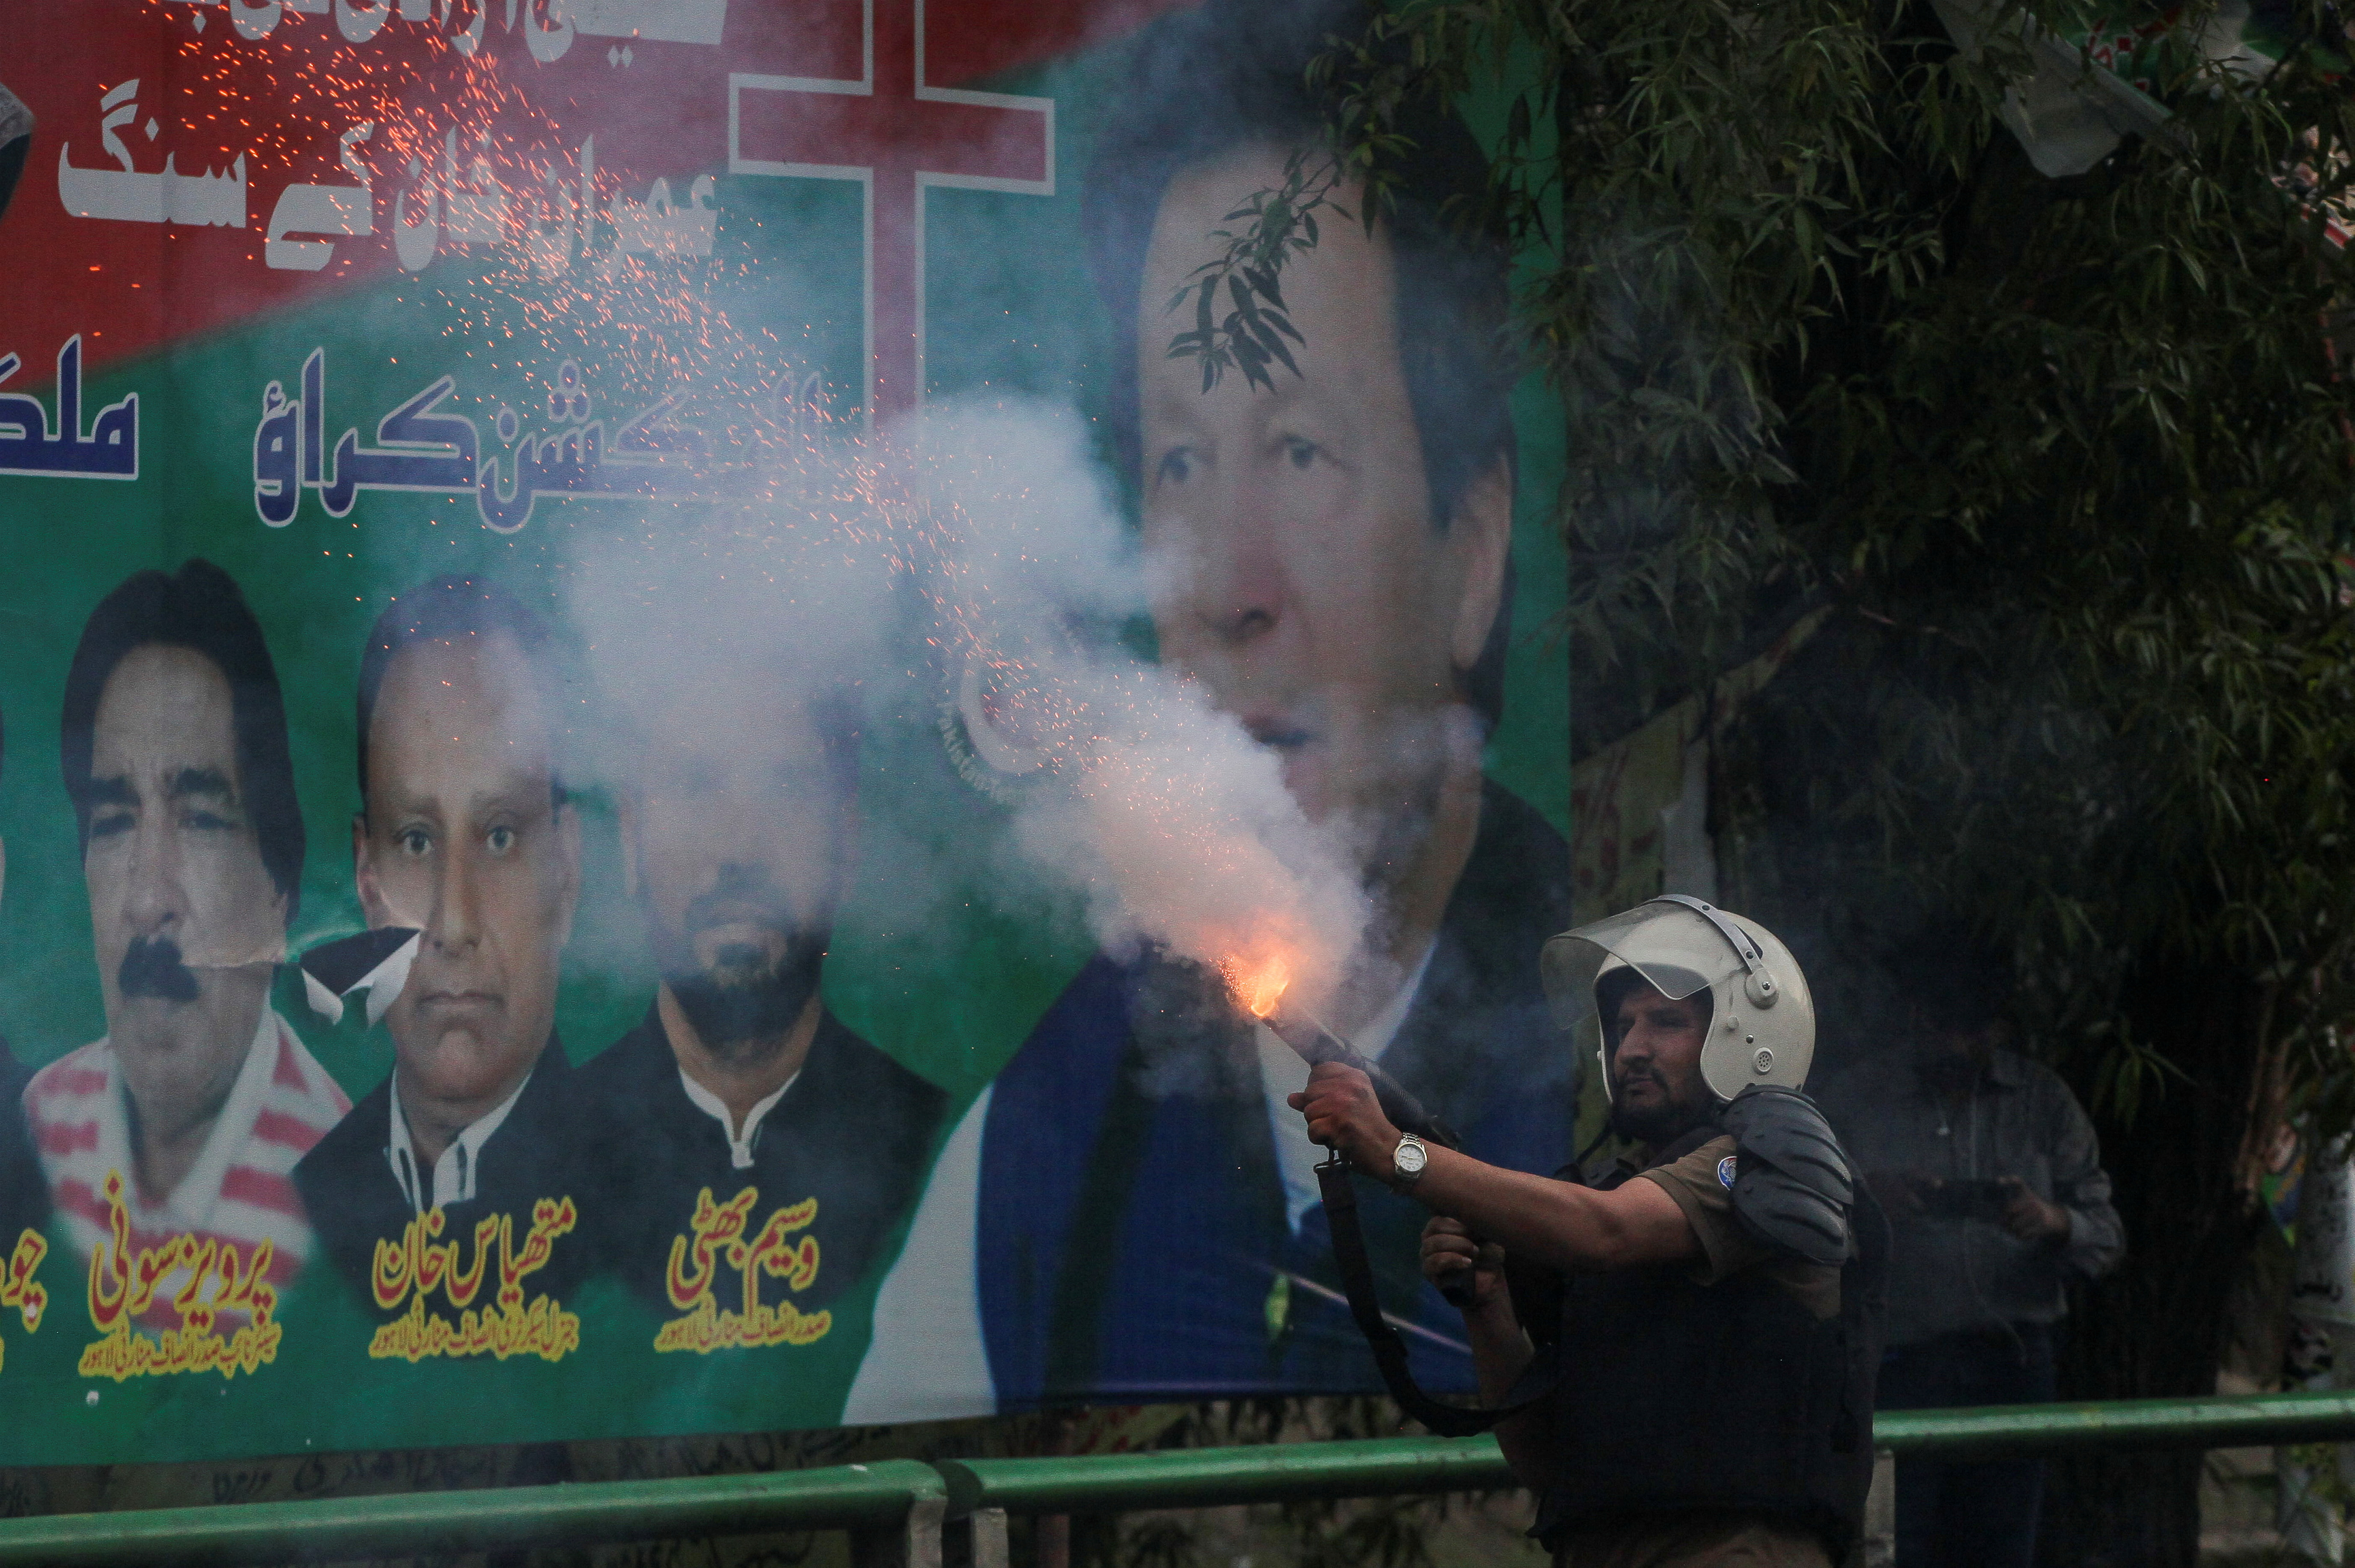 Supporters of former Pakistani PM Khan clash with police ahead of his possible arrest, in Lahore